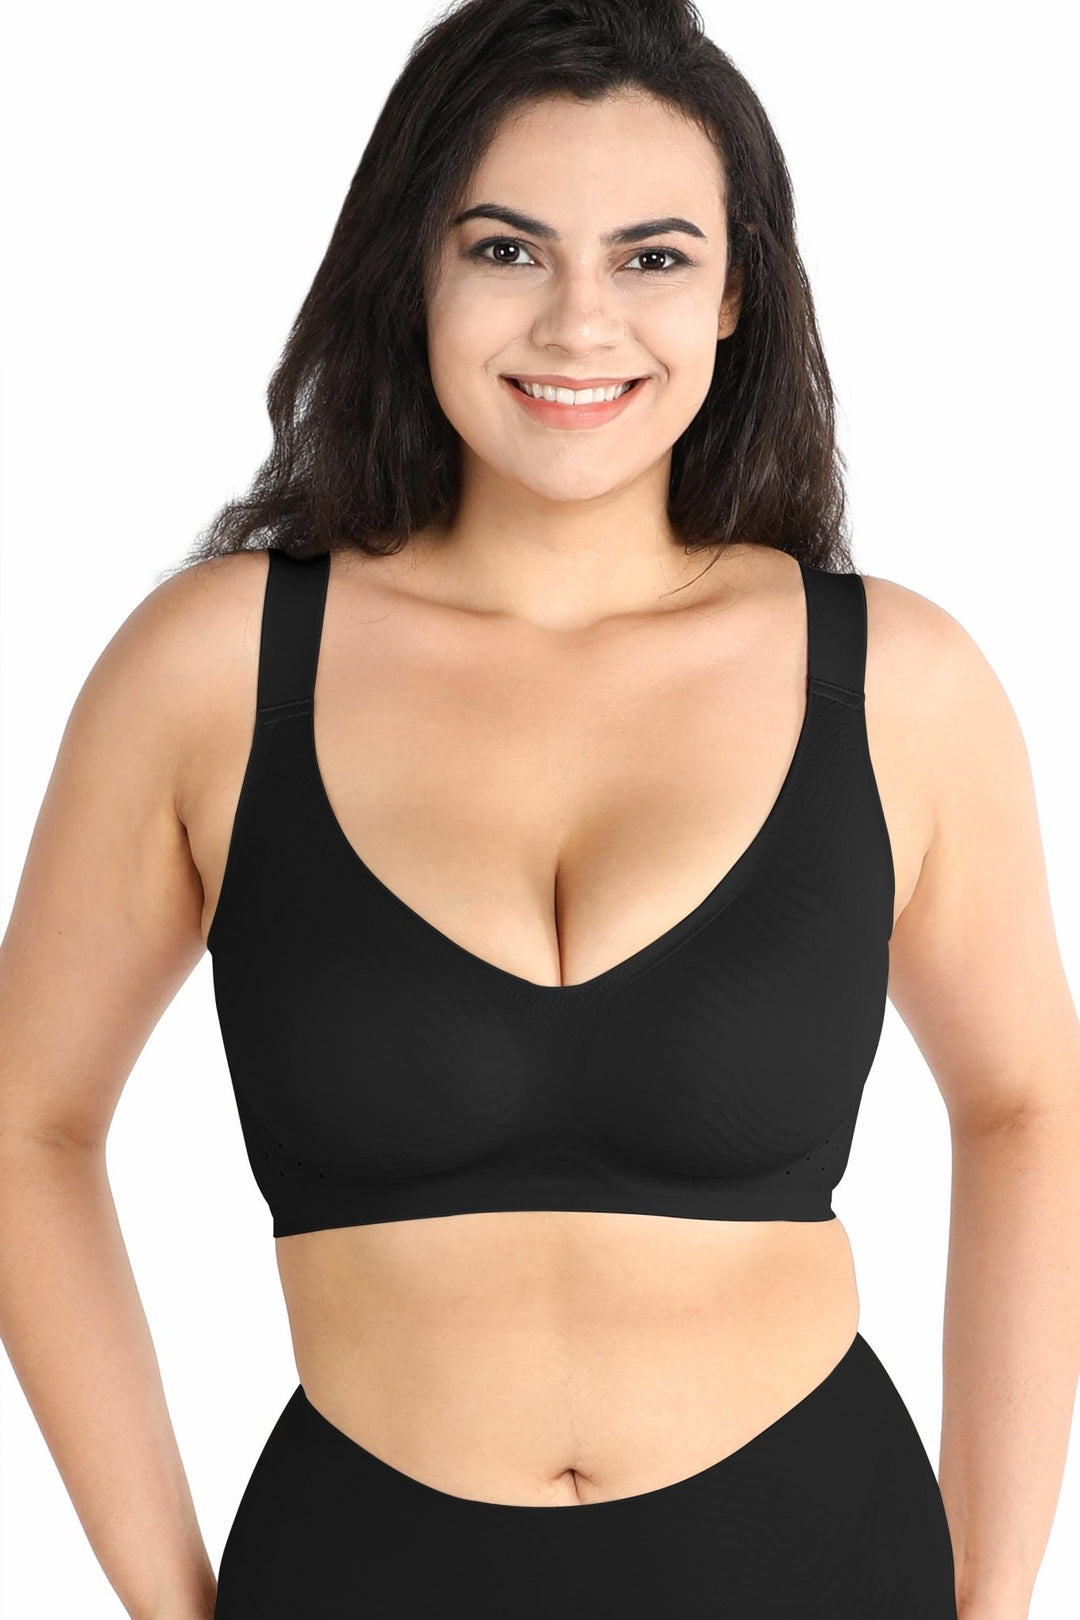 Easy Pieces™️ Max-Support Wire-Free Bra, Great For Large Breast